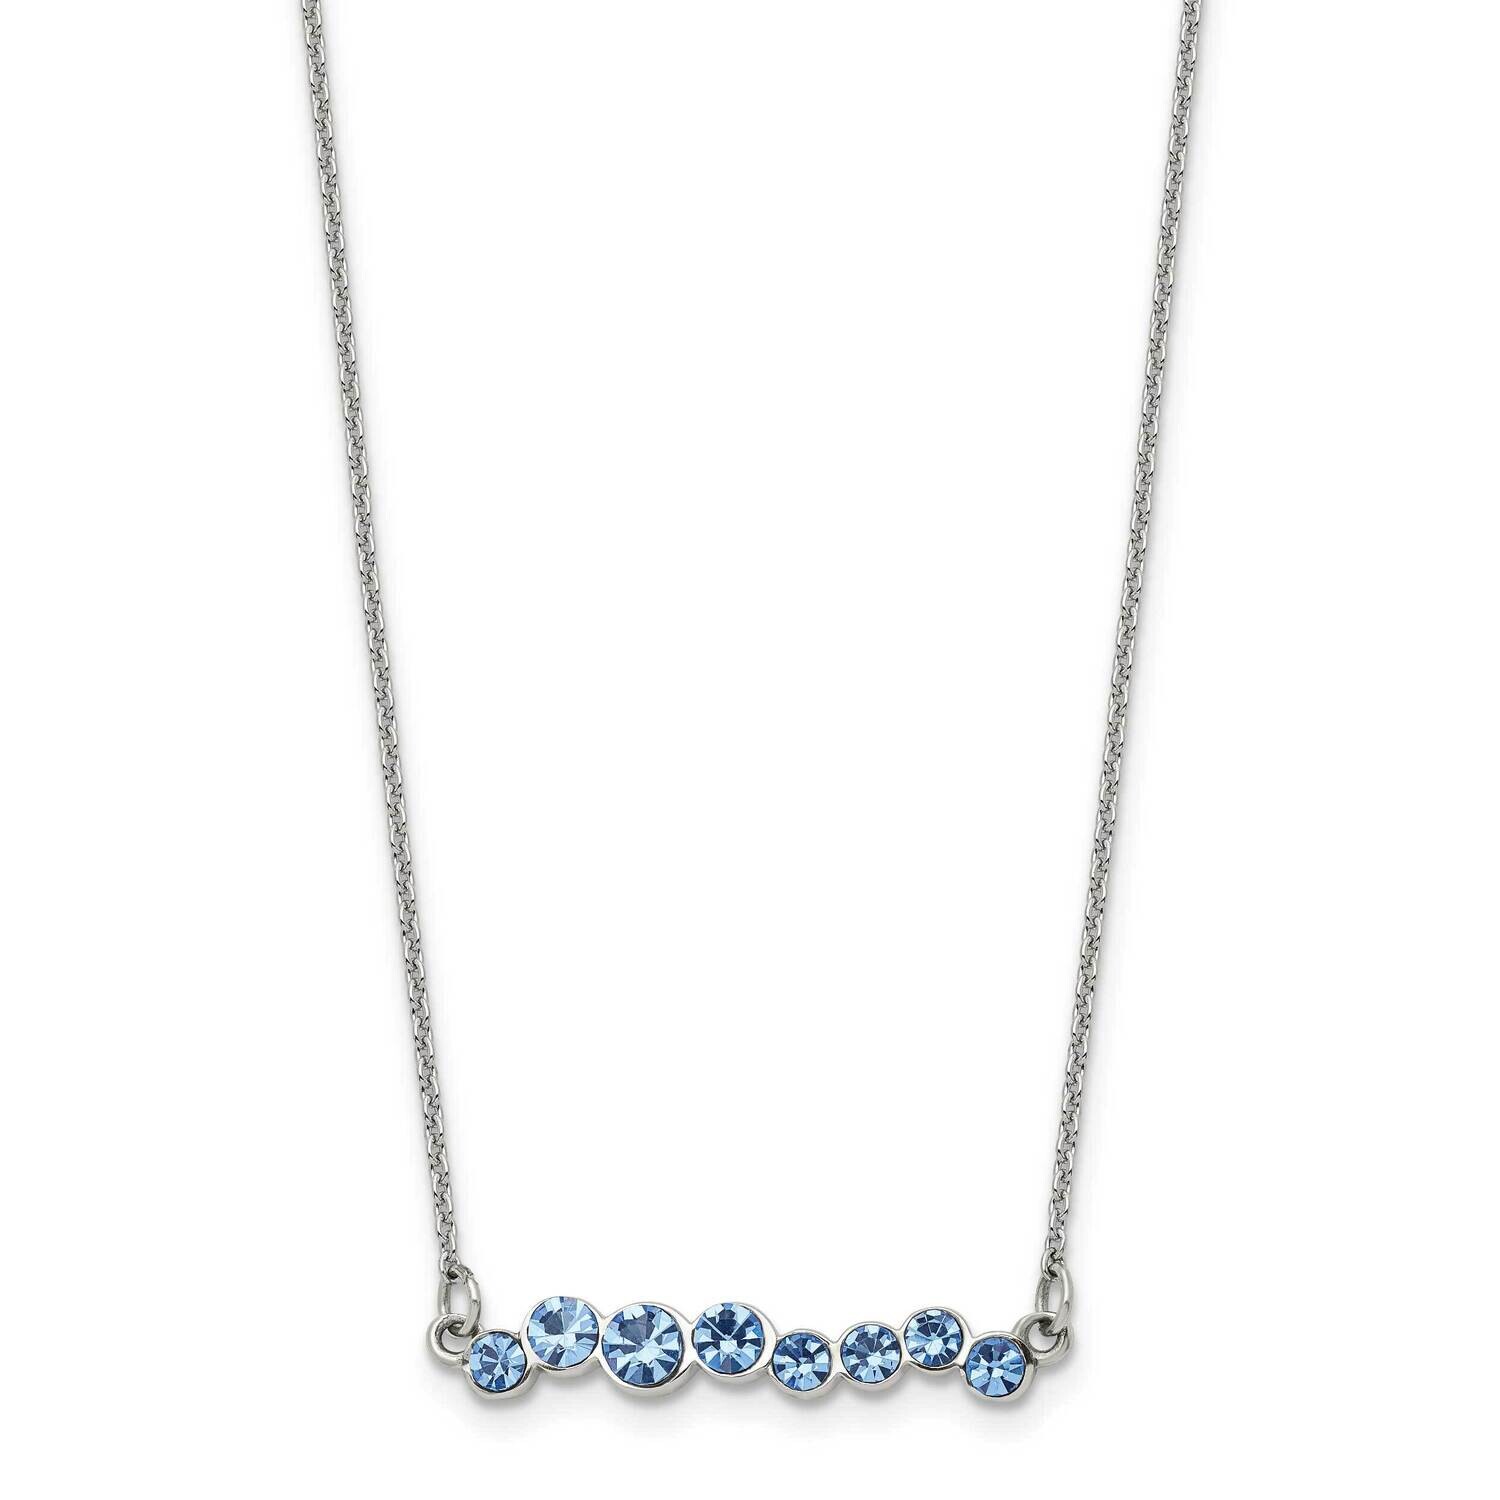 Chisel Polished Blue Preciosa Crystal Bar On A 16 Inch Cable Chain A 2 Inch Extension Necklace Stainless Steel SRN3073-16